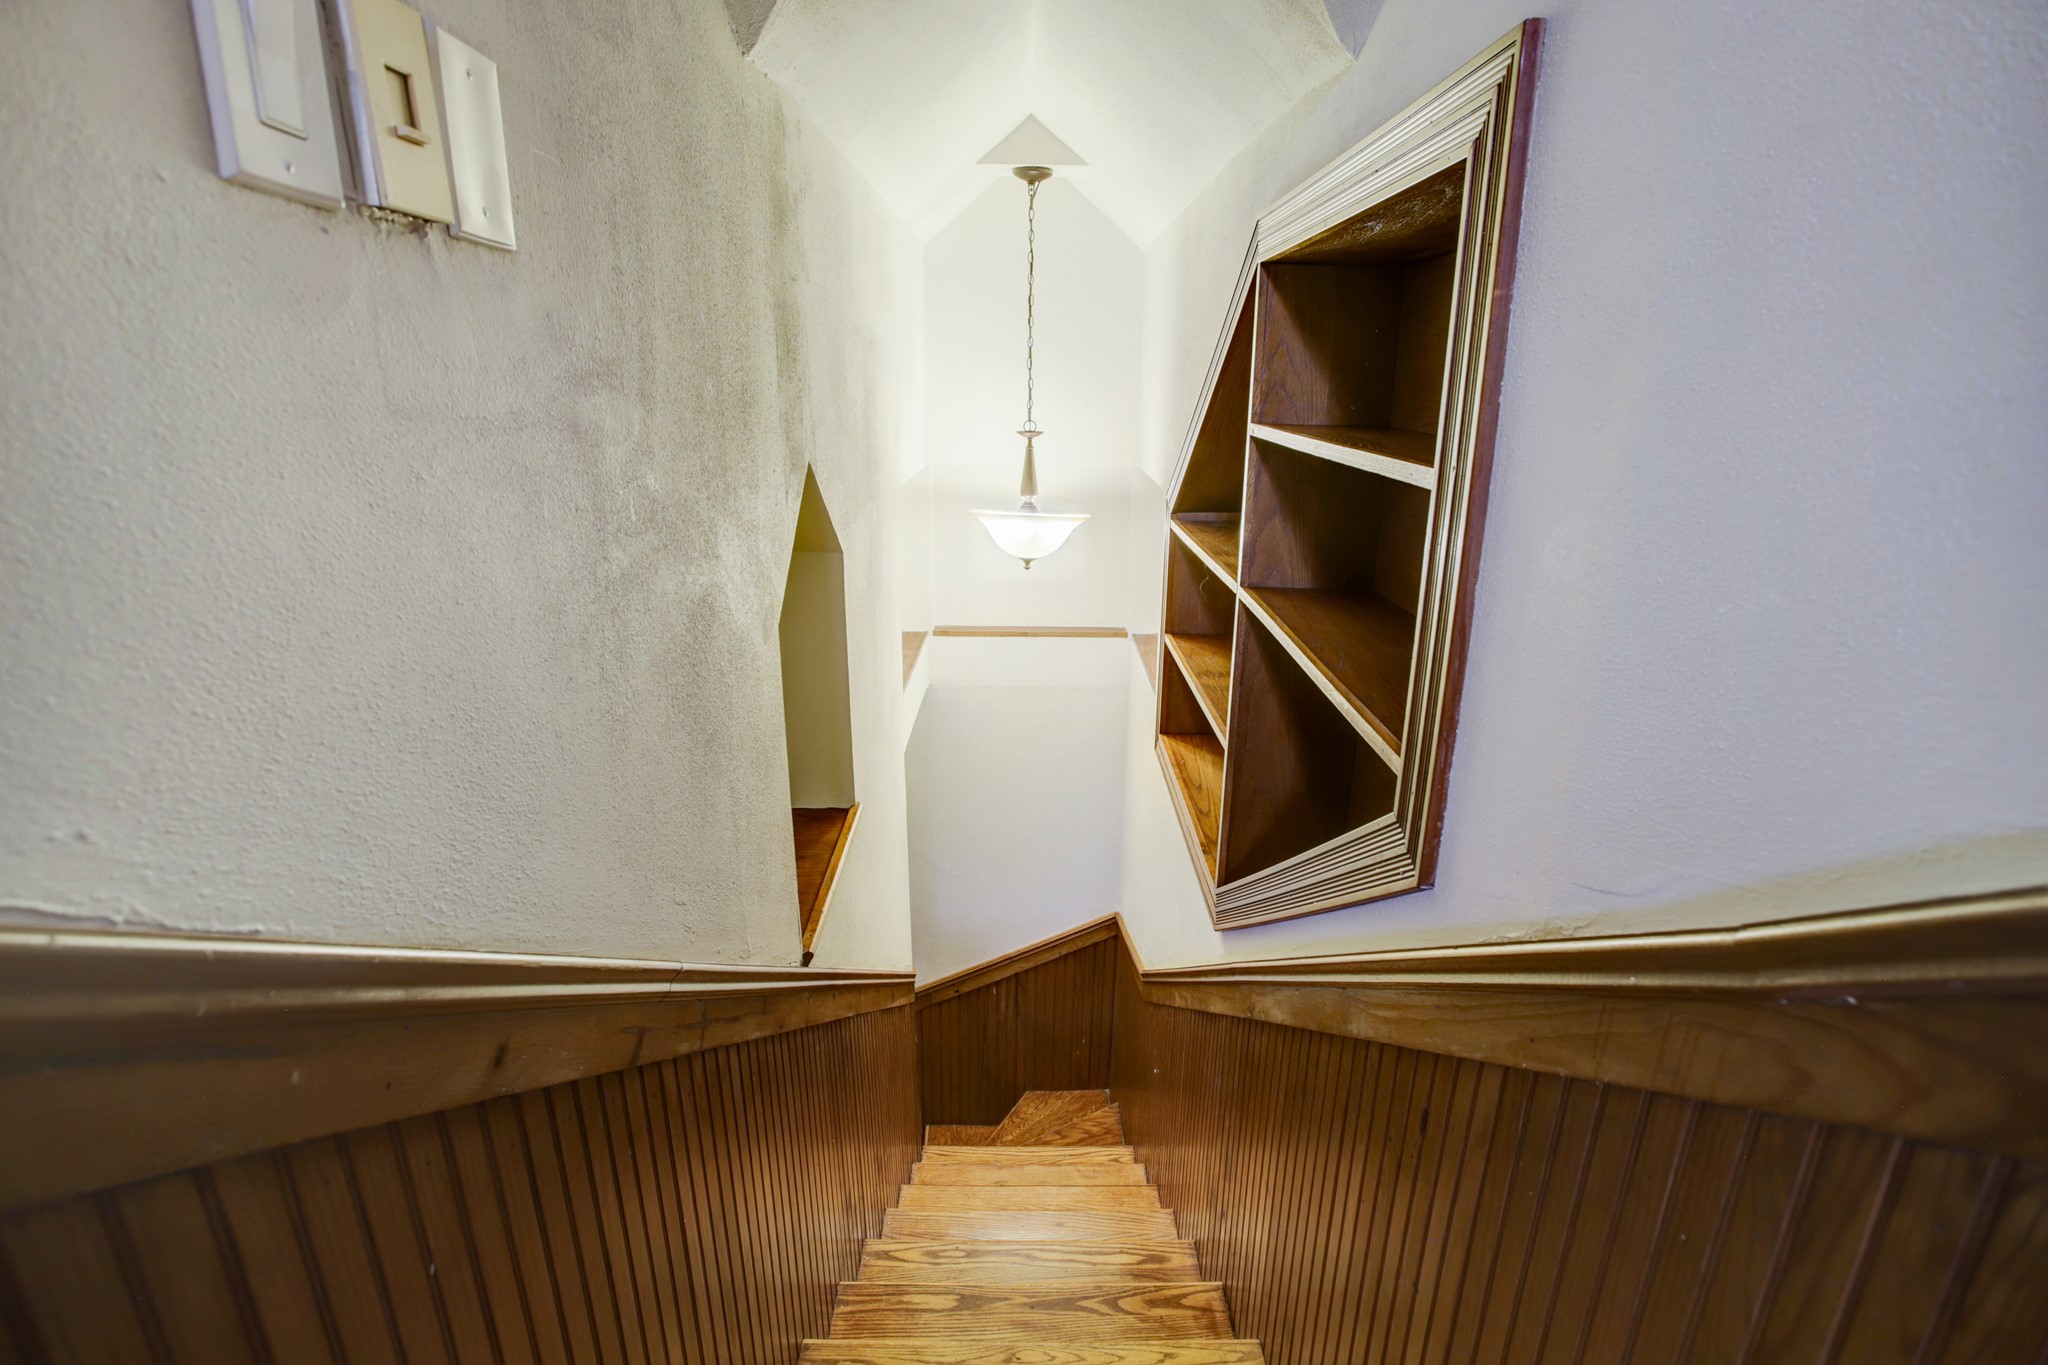 Charming architecture – staircase is adorned with a unique vaulted ceiling and art niche.